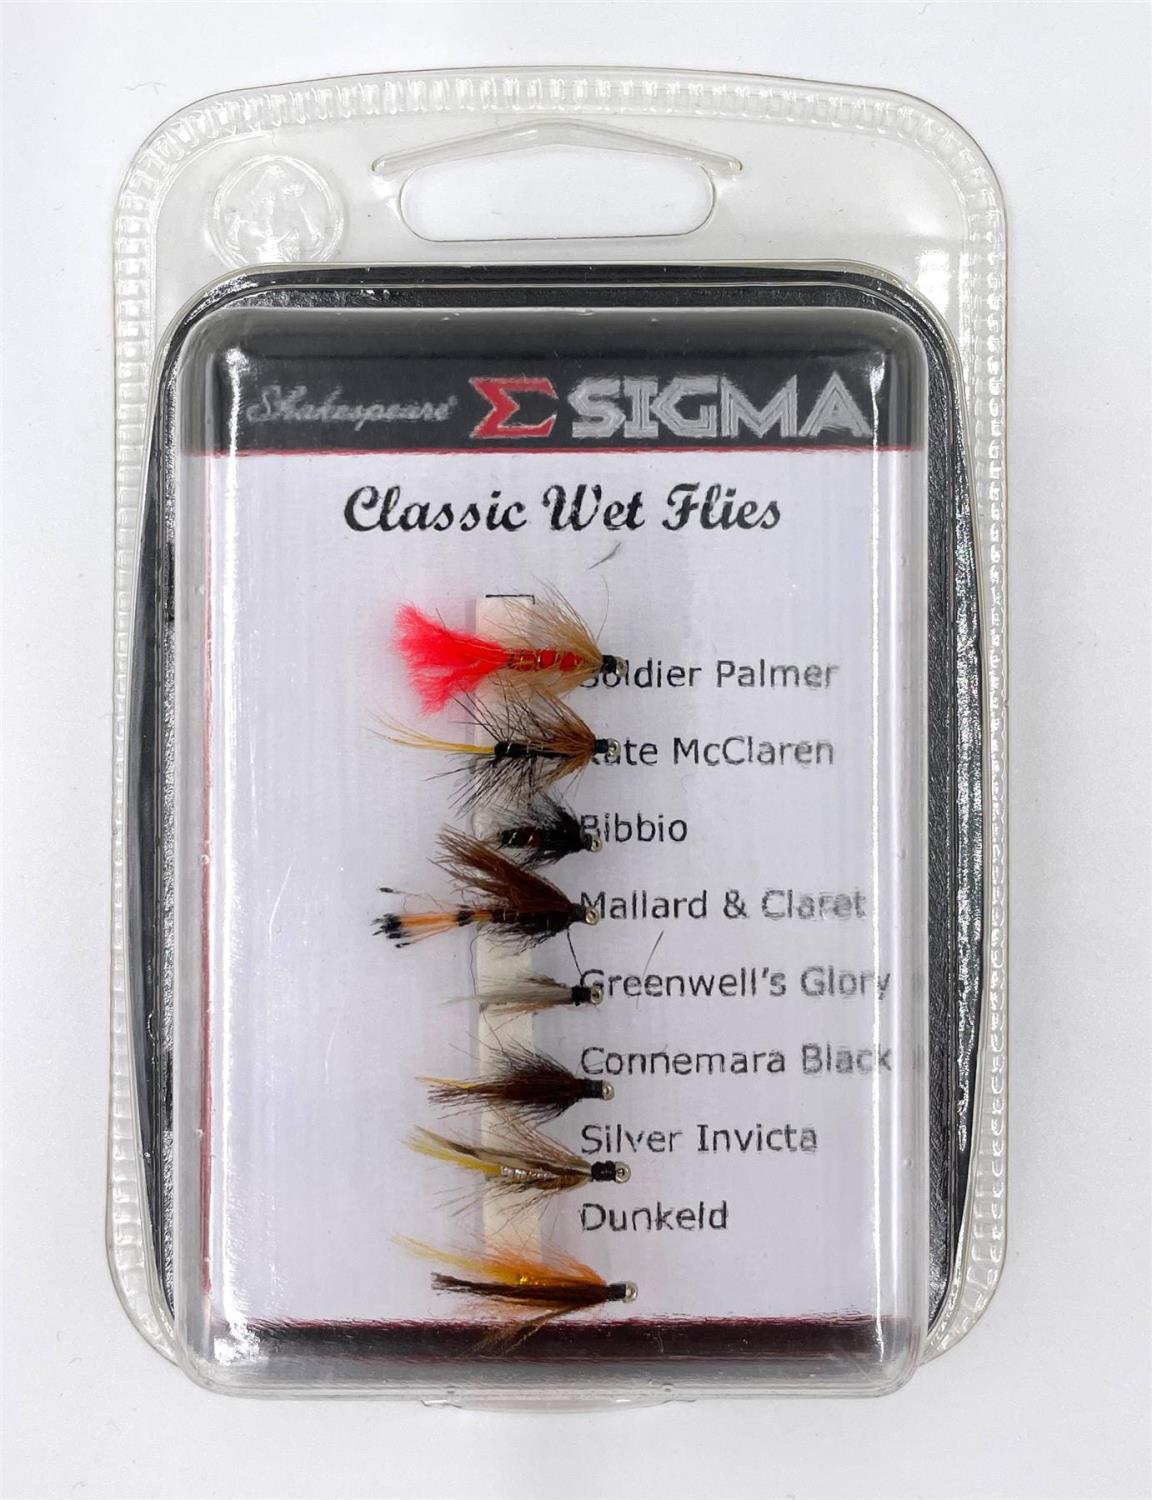 Shakespeare  Sigma Fly Selection 2 Classic Wets